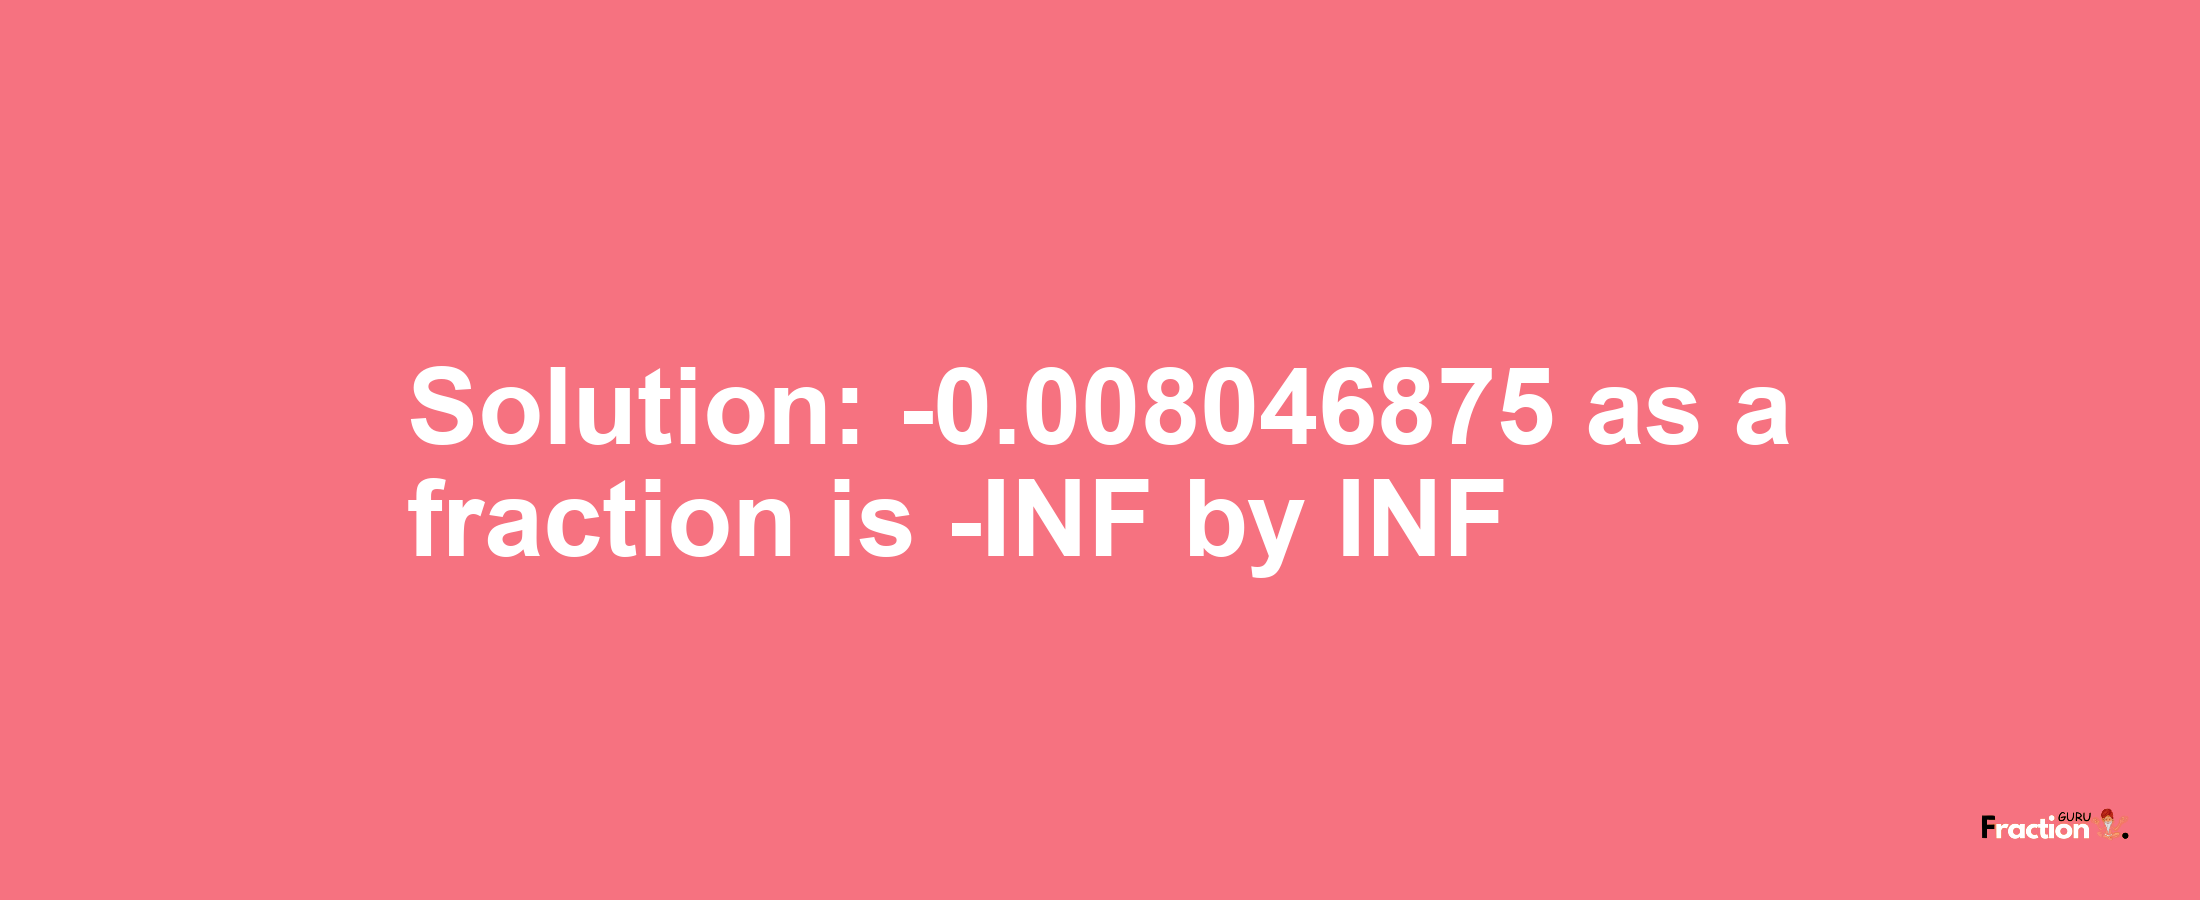 Solution:-0.008046875 as a fraction is -INF/INF